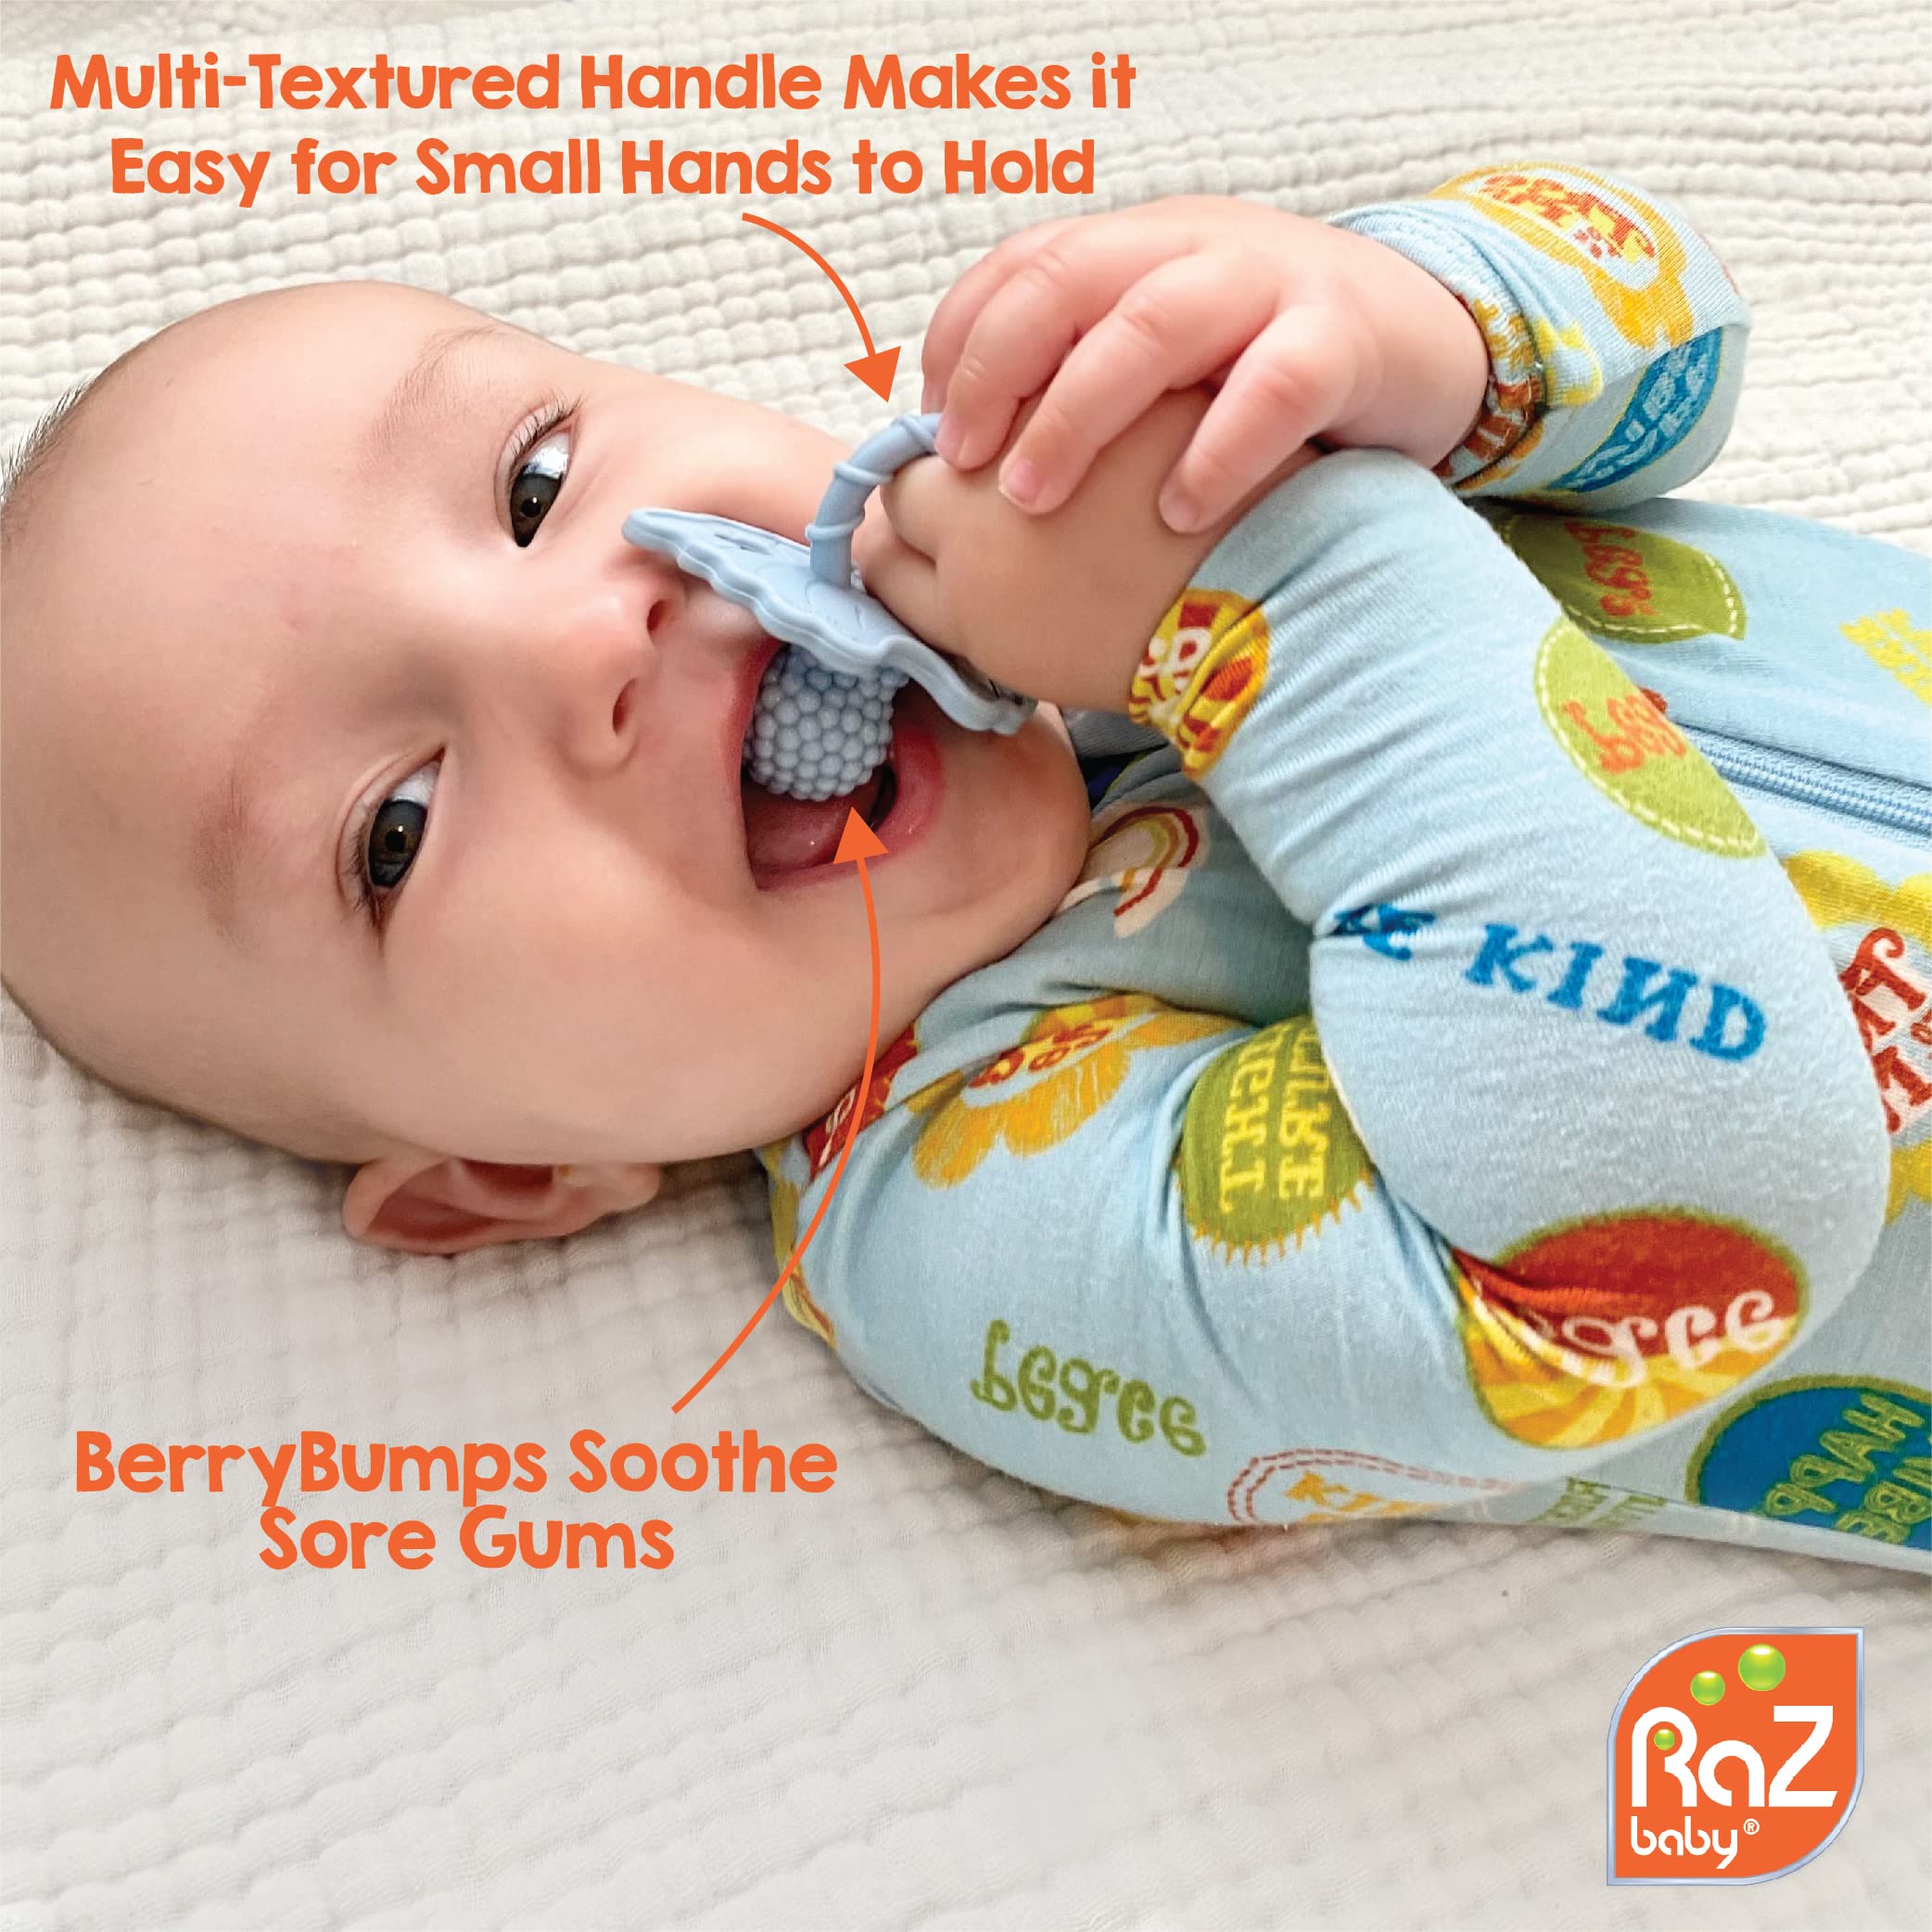 RaZbaby RaZberry Silicone Baby Teether Toy - Berrybumps Soothe Babies Sore gums - Infant Teething Toy - Hands Free Design - BPA 